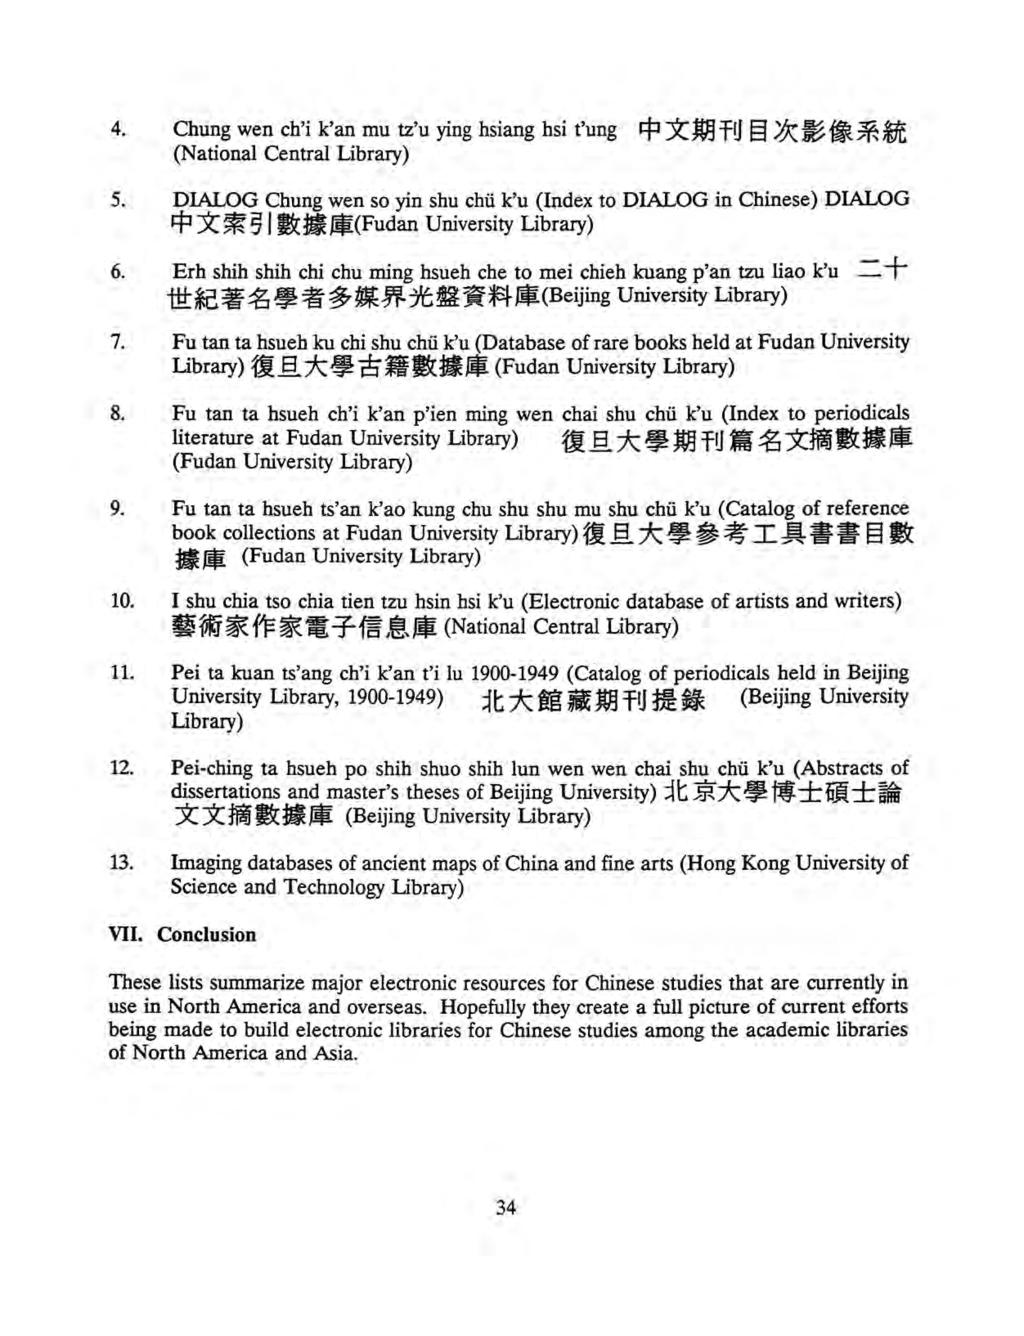 4. Chung wen ch'i k'an mu tz'u ying hsiang hsi t'ung ff'^^ifdb^c^^^m (National Central Library) 5. DIALOG Chung wen so yin shu chii k'u (Index to DIALOG in Chinese) DIALOG 4* 3t^?